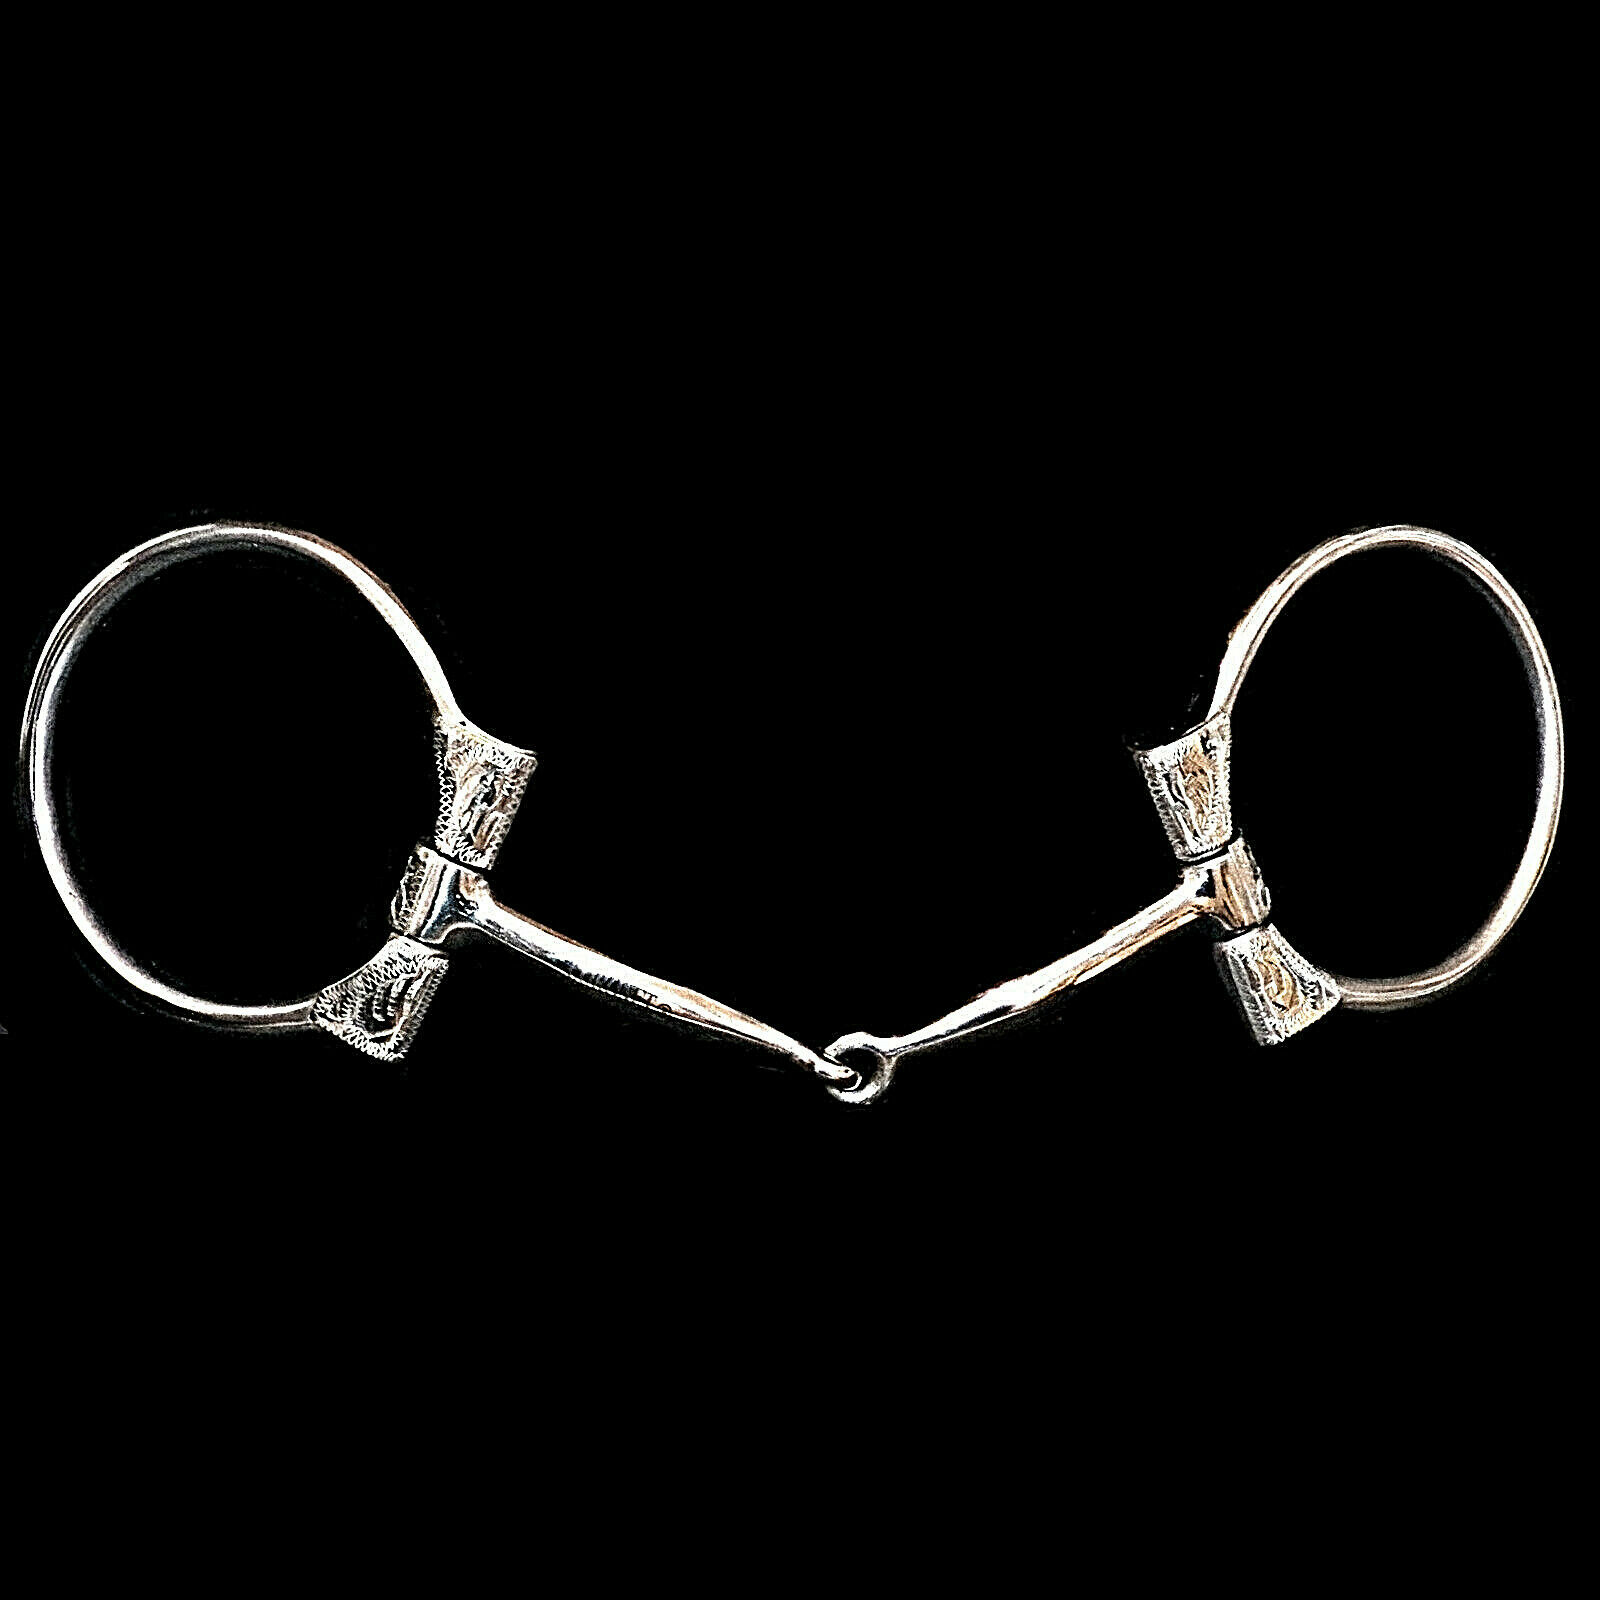 Aqha Legal German Silver Stainless Steel Show Don Dodge D Dee Ring Snaffle Bit